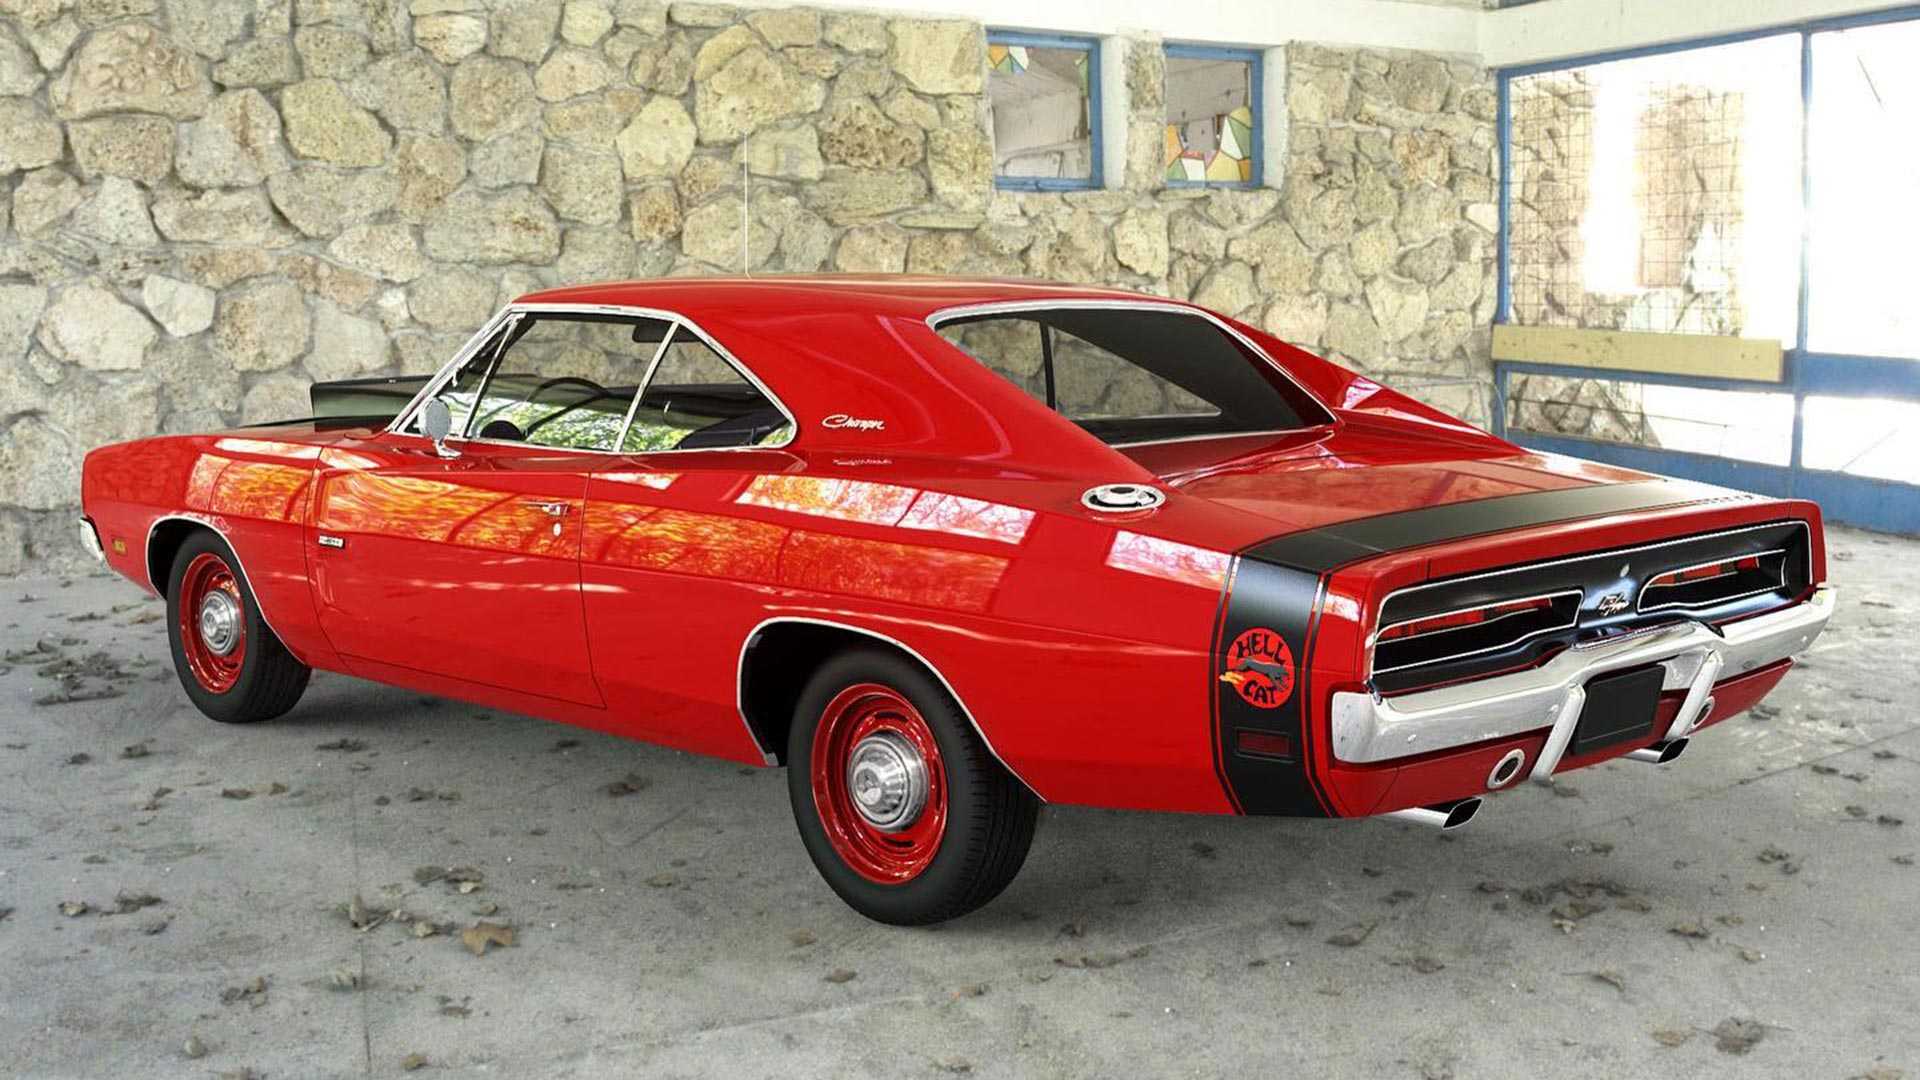 Charger R T Hellcat Imagines A Muscle Car That Never Was